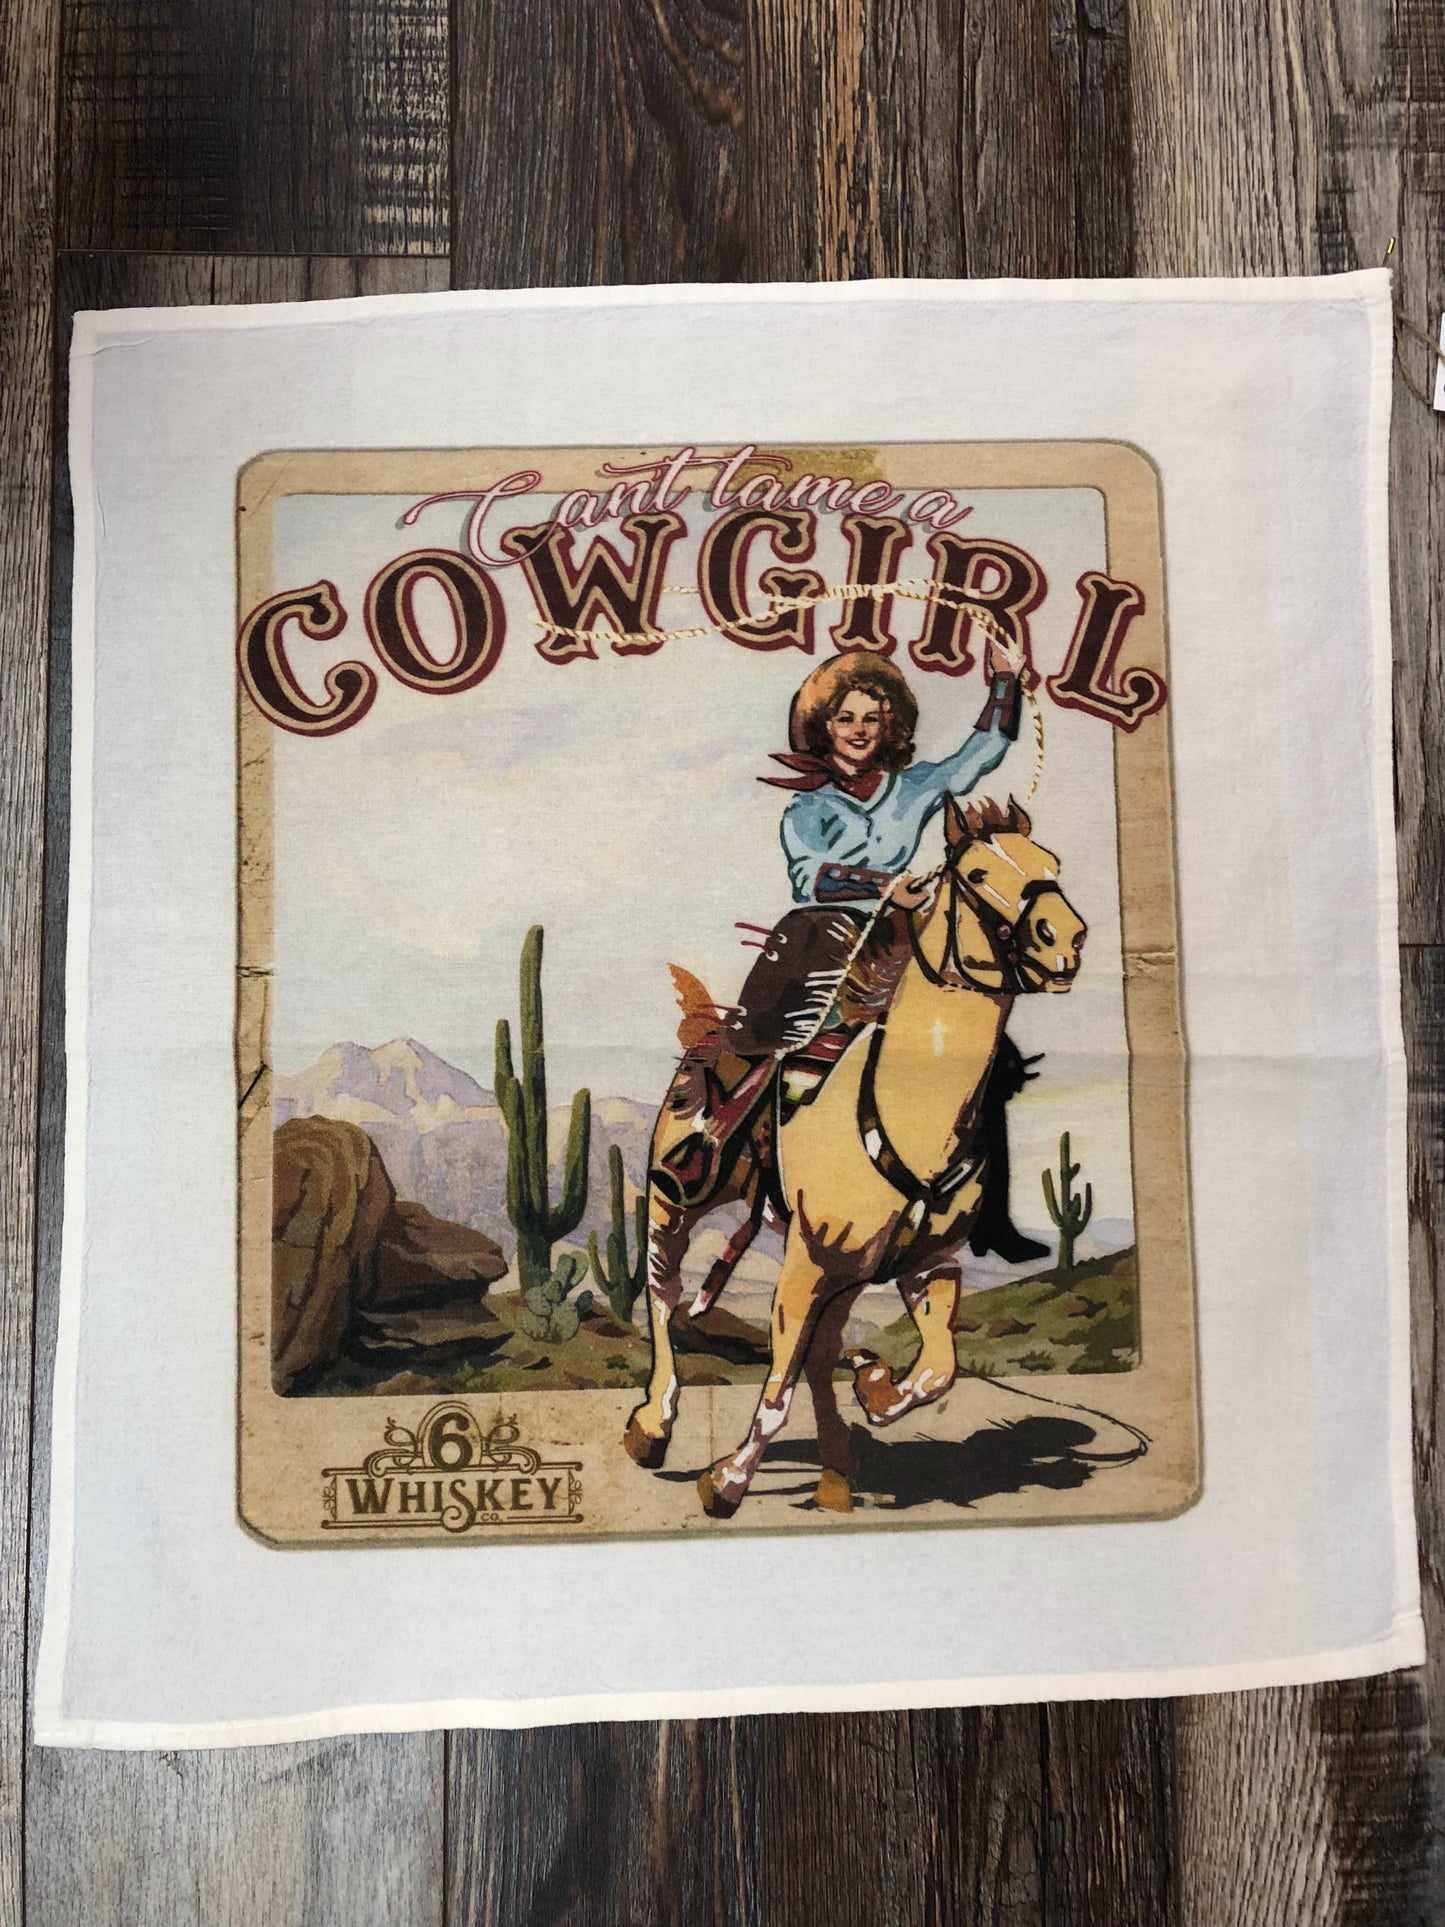 tea towel cowgirl 6 Whiskey western rider horse cotton